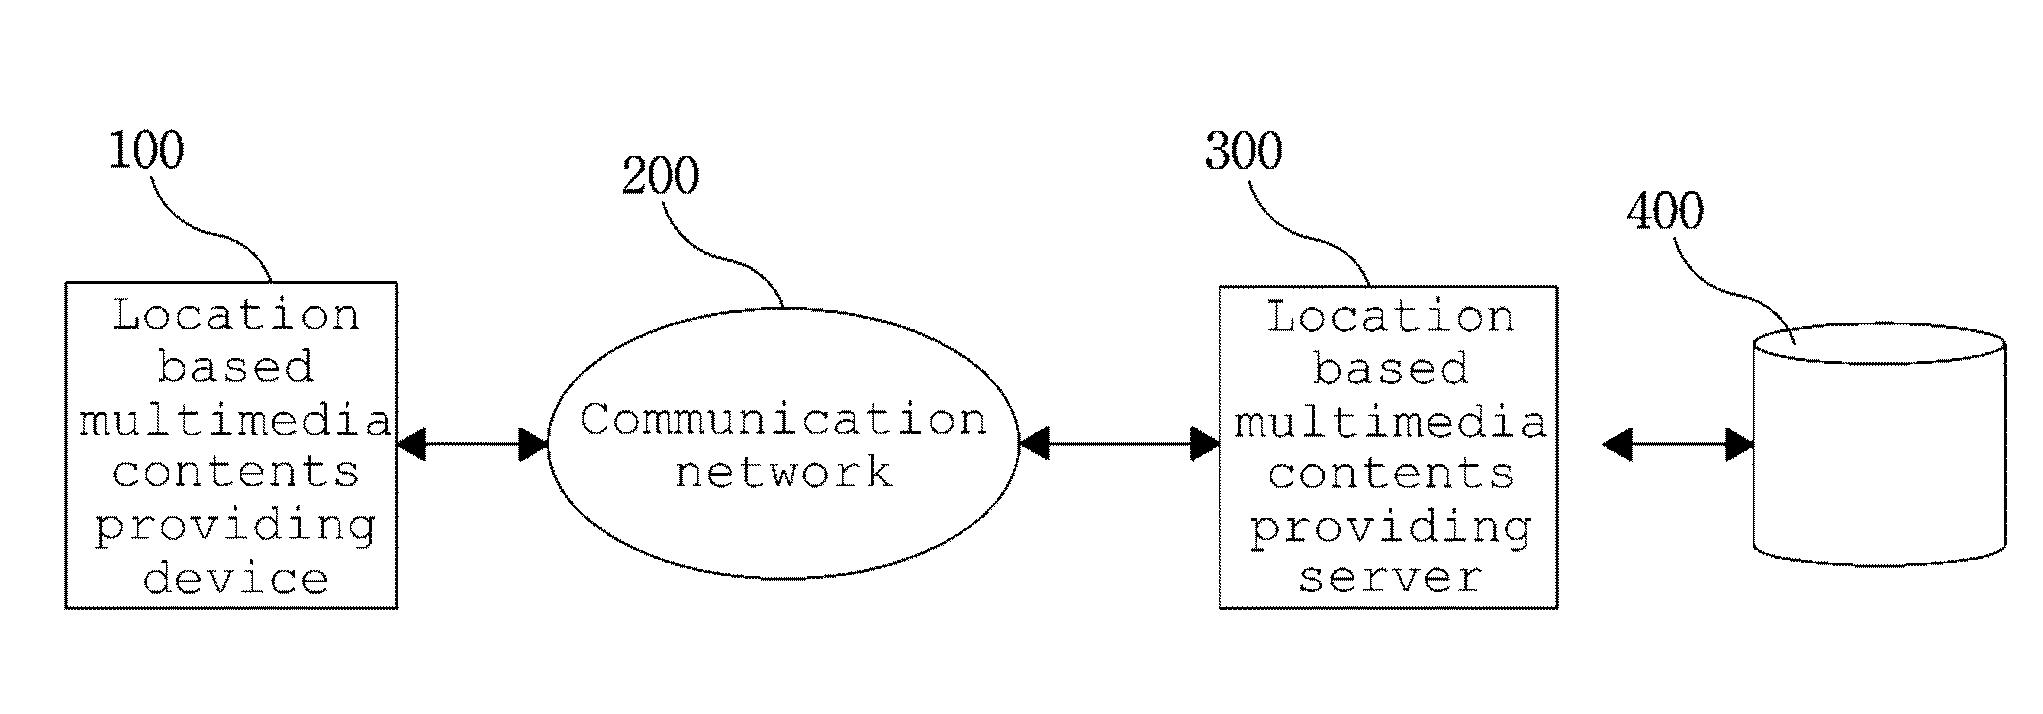 Apparatus and method for providing location based multimedia contents